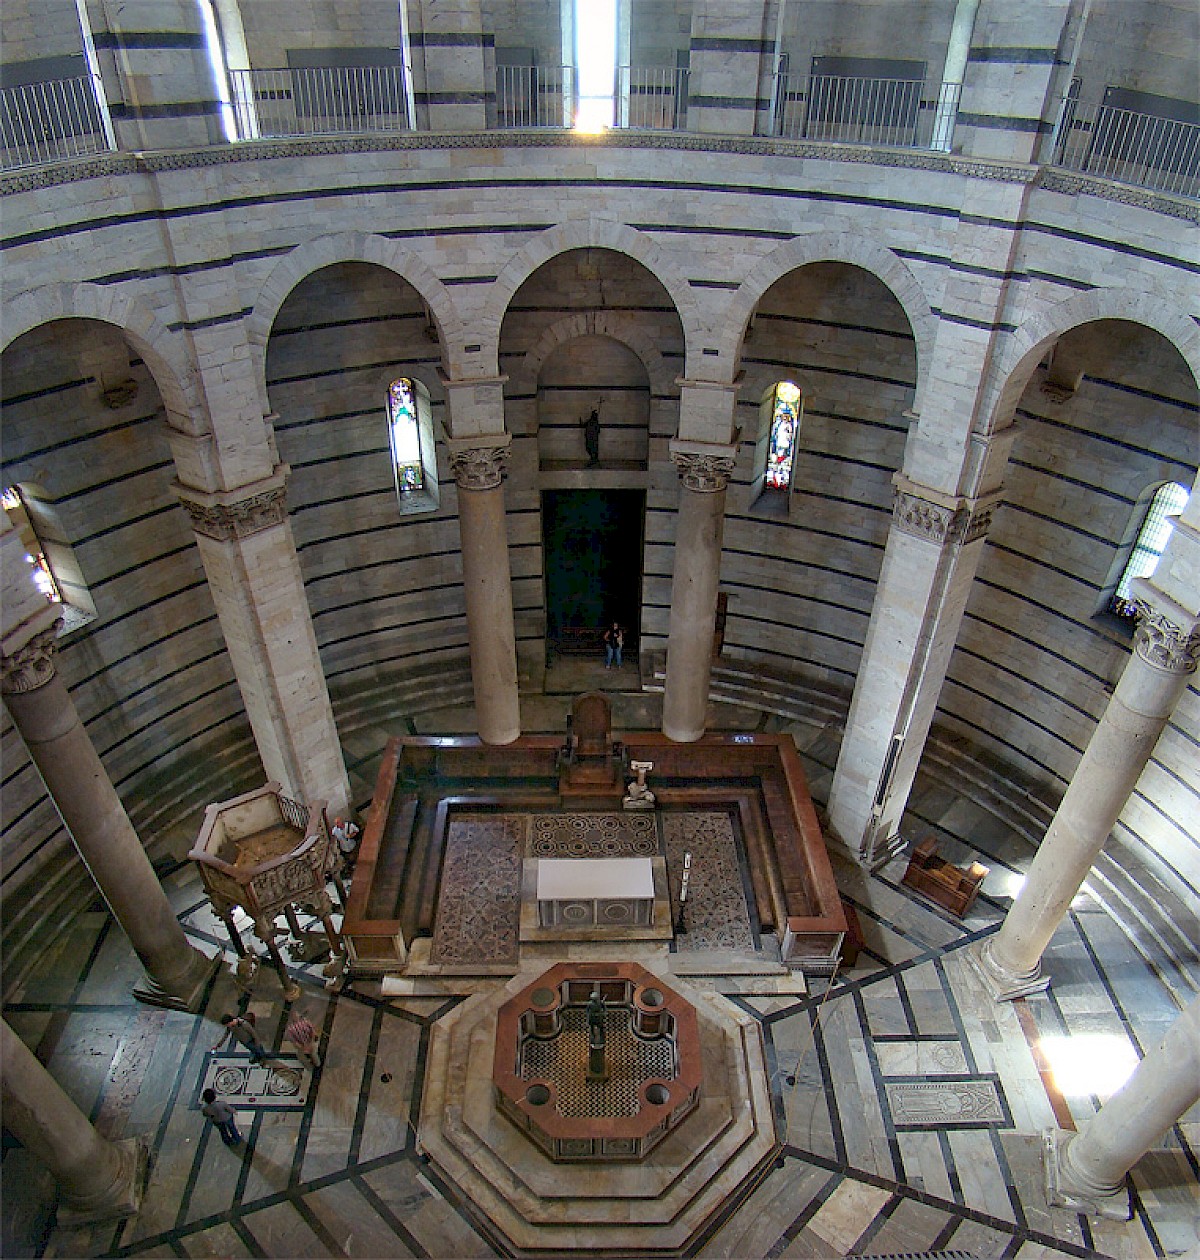 Pisa Baptistry, additional view